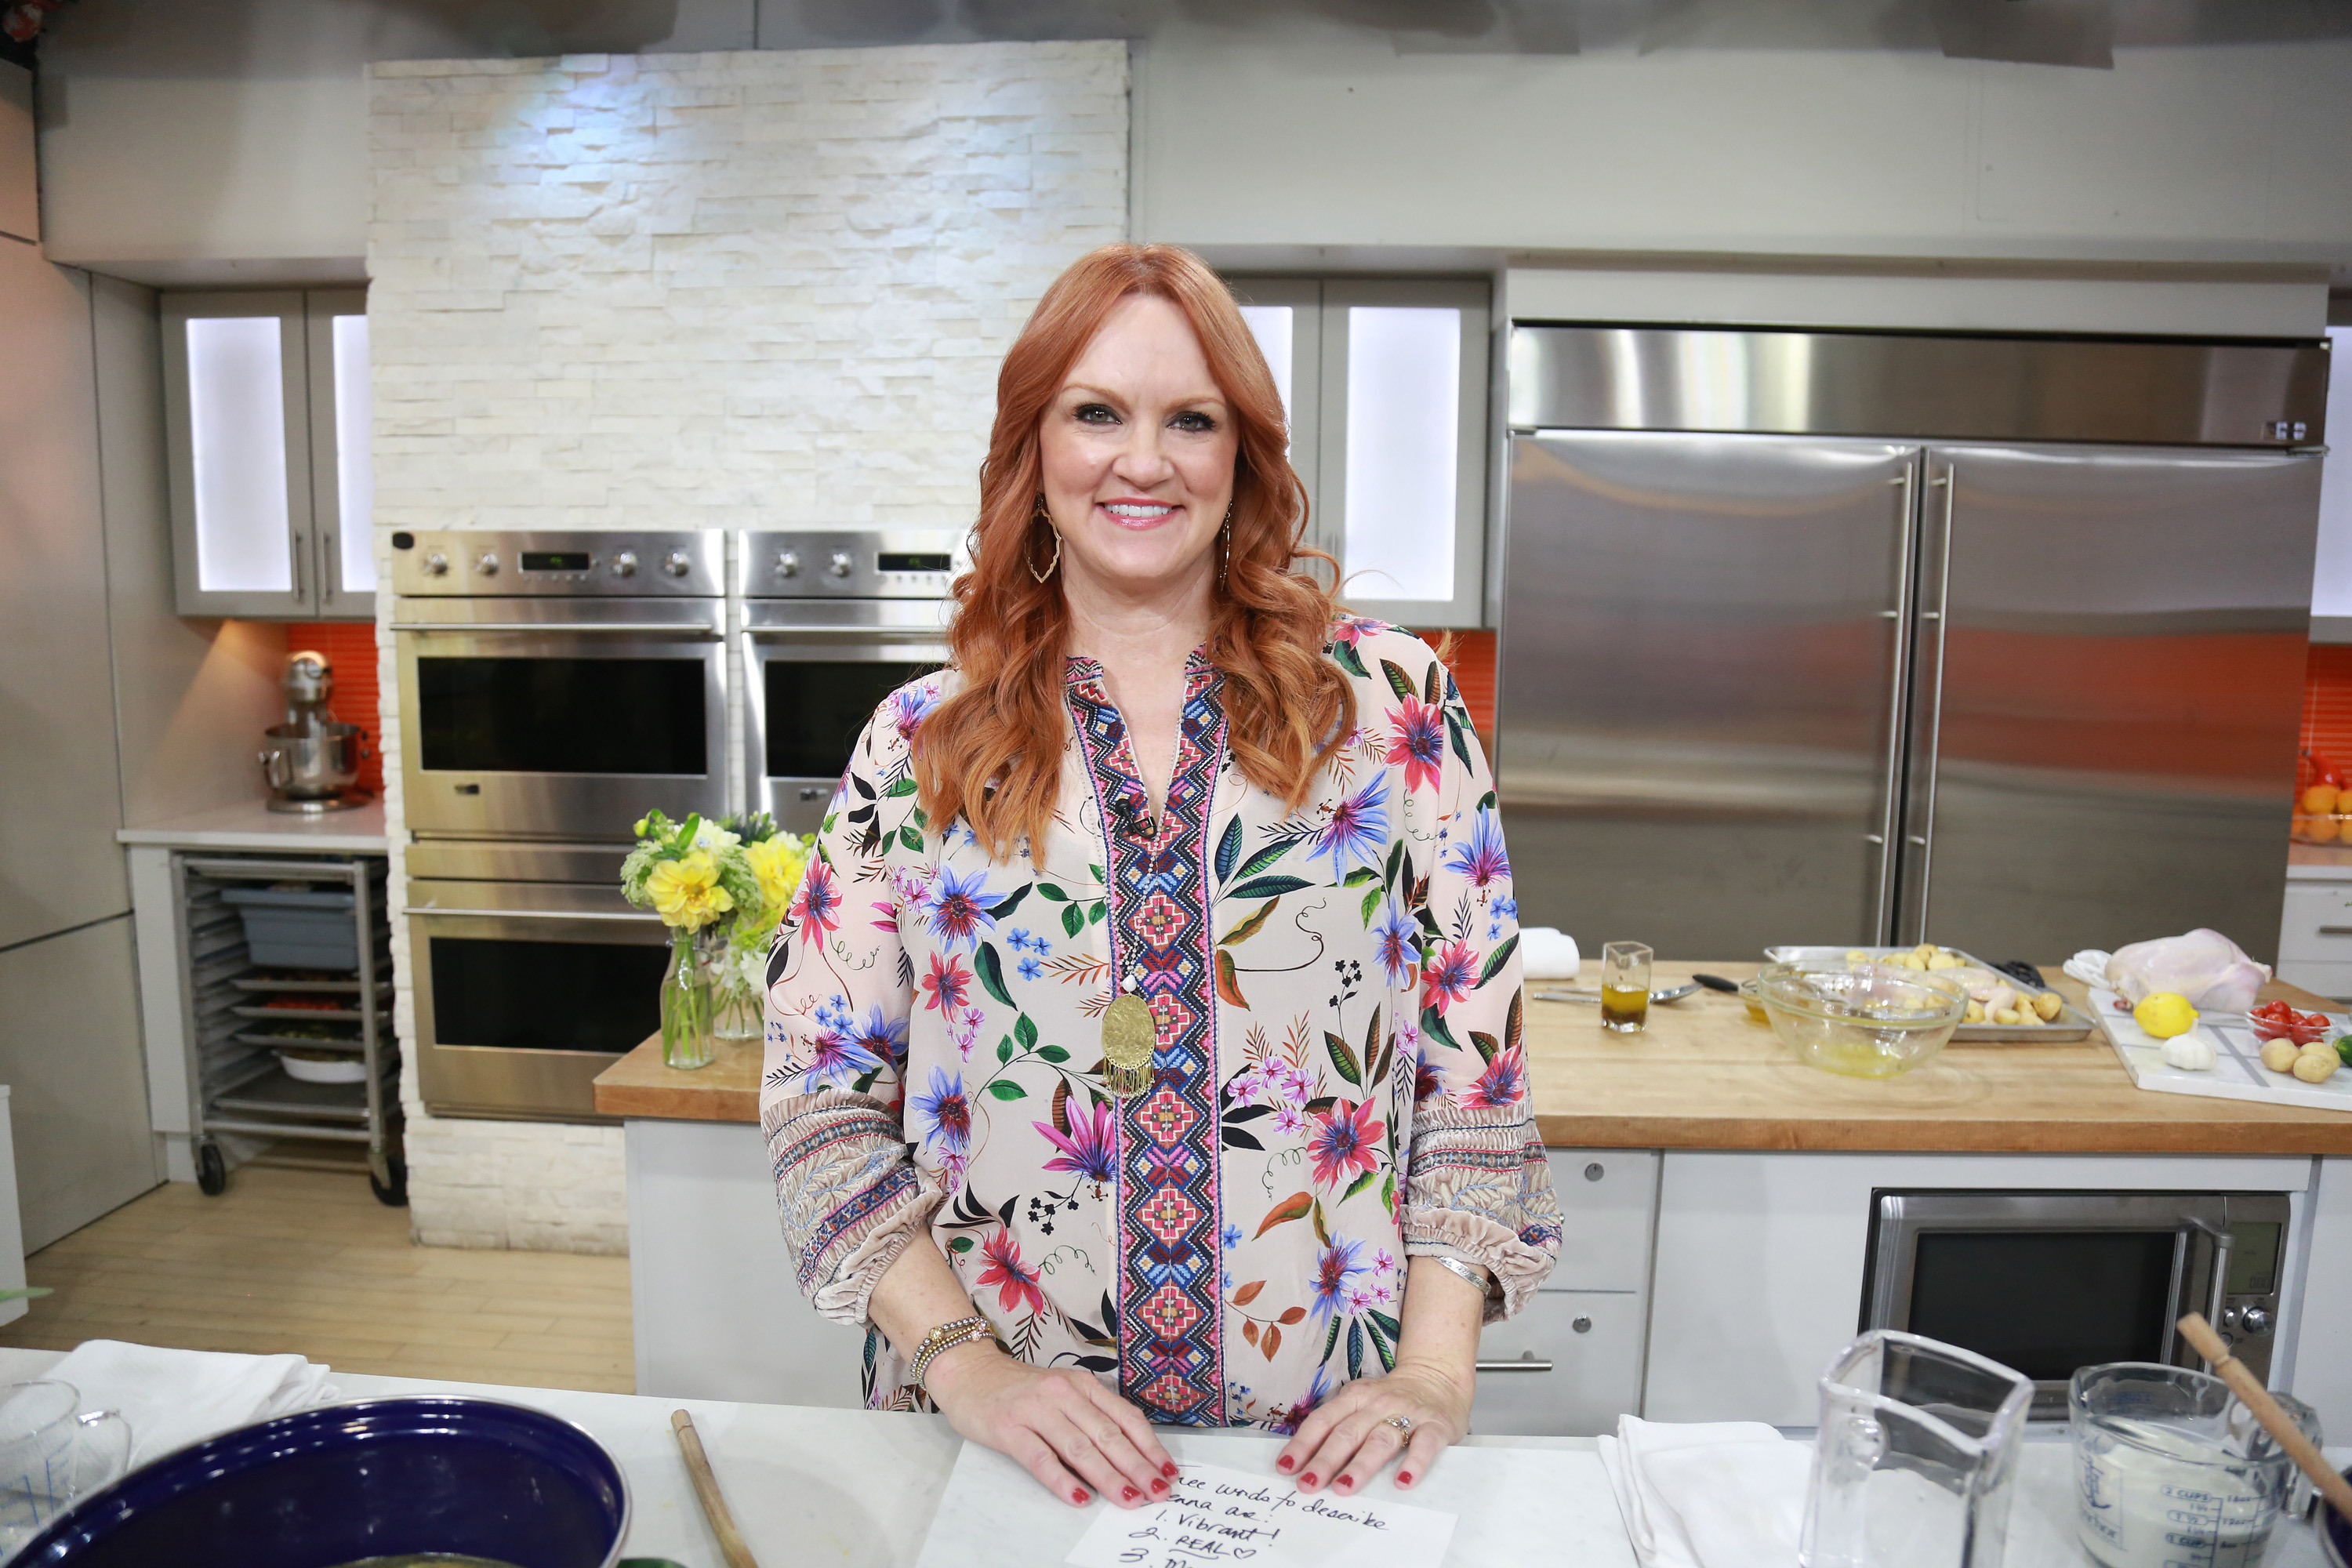 Ree Drummond, 'The Pioneer Woman' poses for a photograph